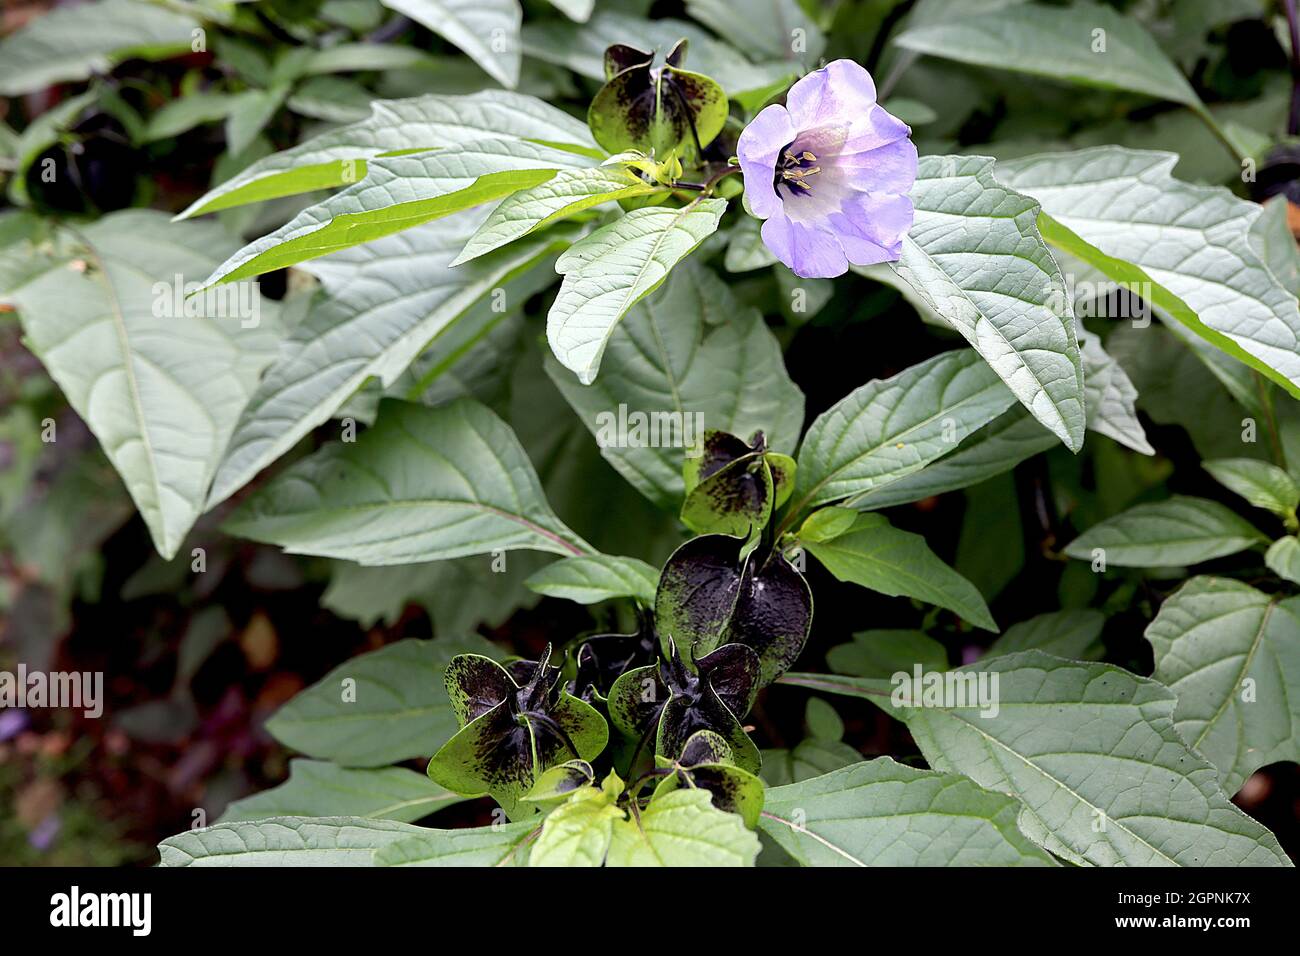 Nicandra physalodes shoo-fly plant – bell-shaped pale lilac flowers with white throat and purple blotch,  September, England, UK Stock Photo